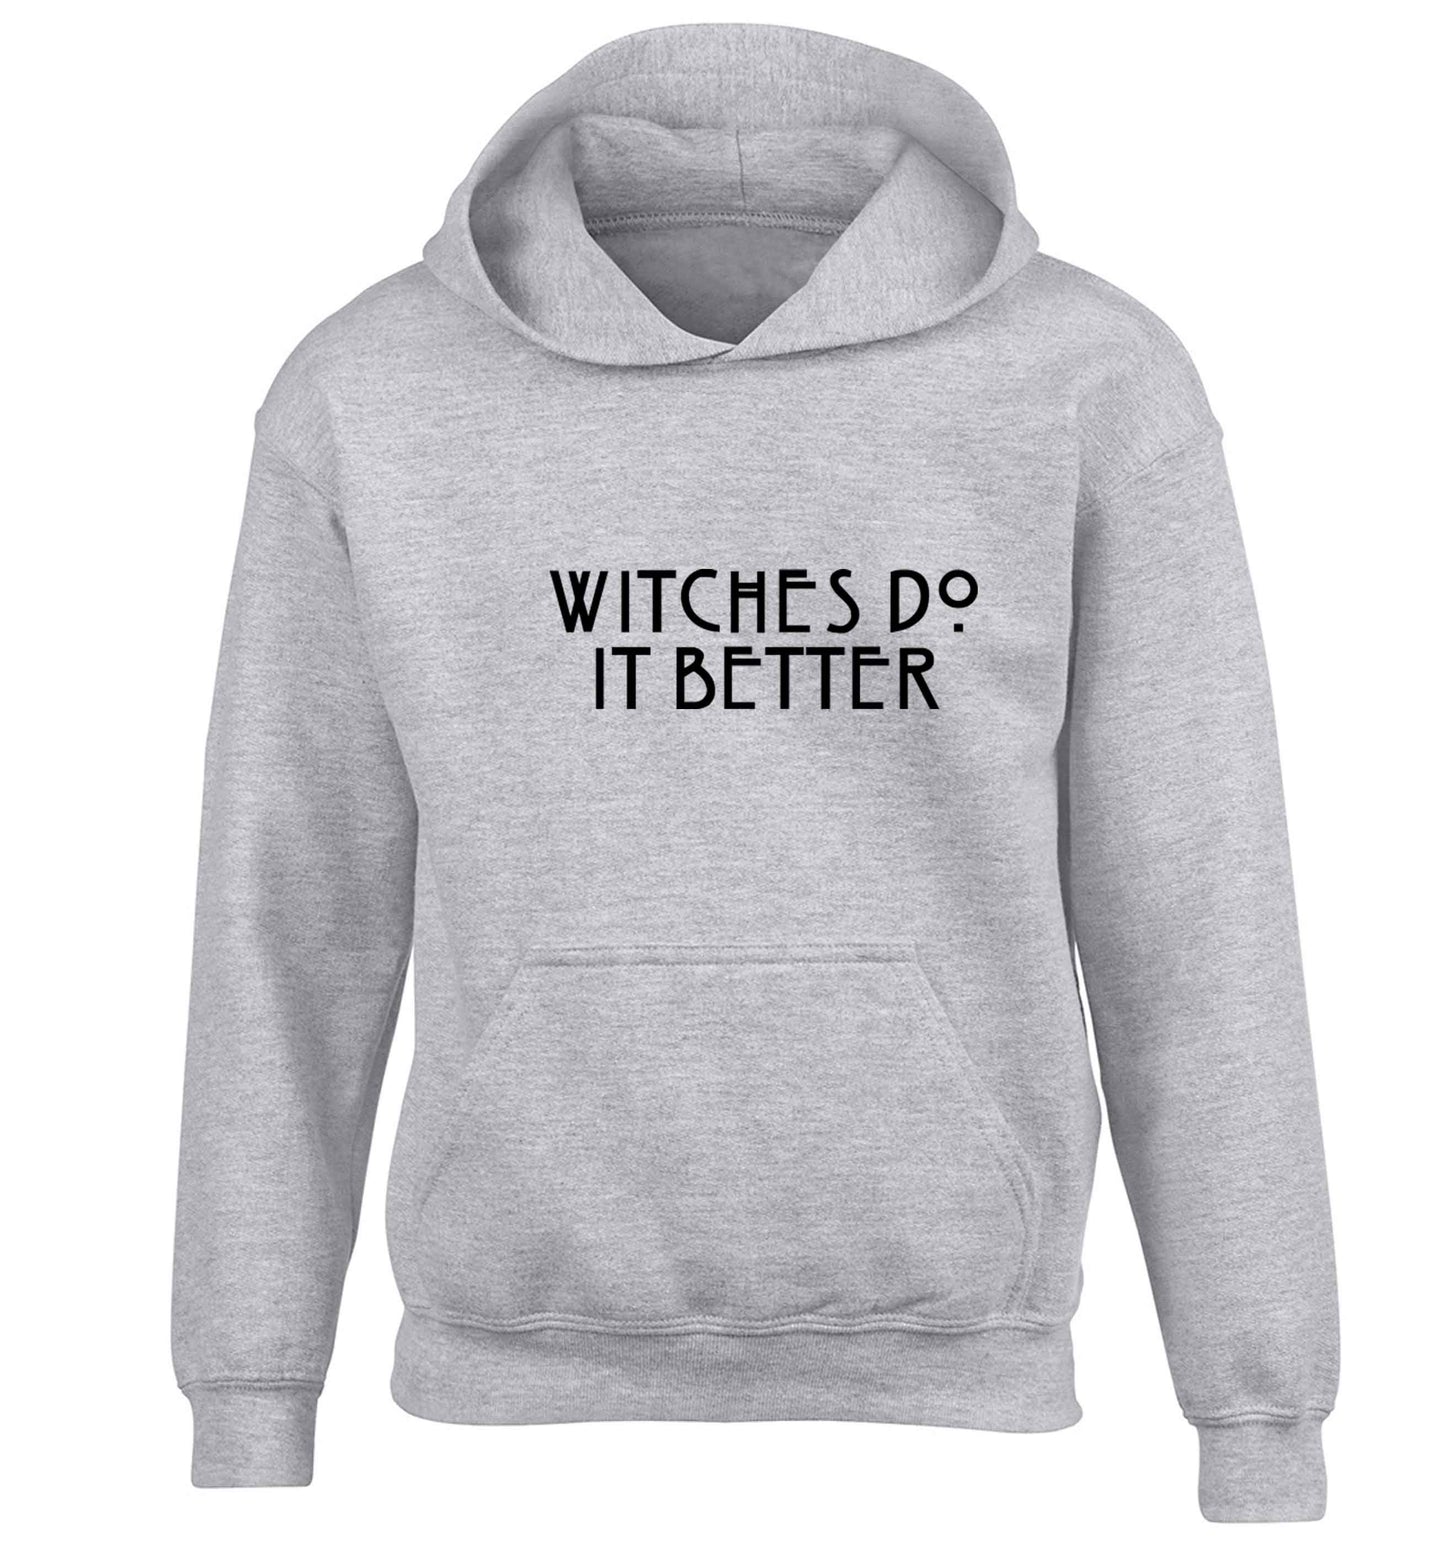 Witches do it better children's grey hoodie 12-13 Years